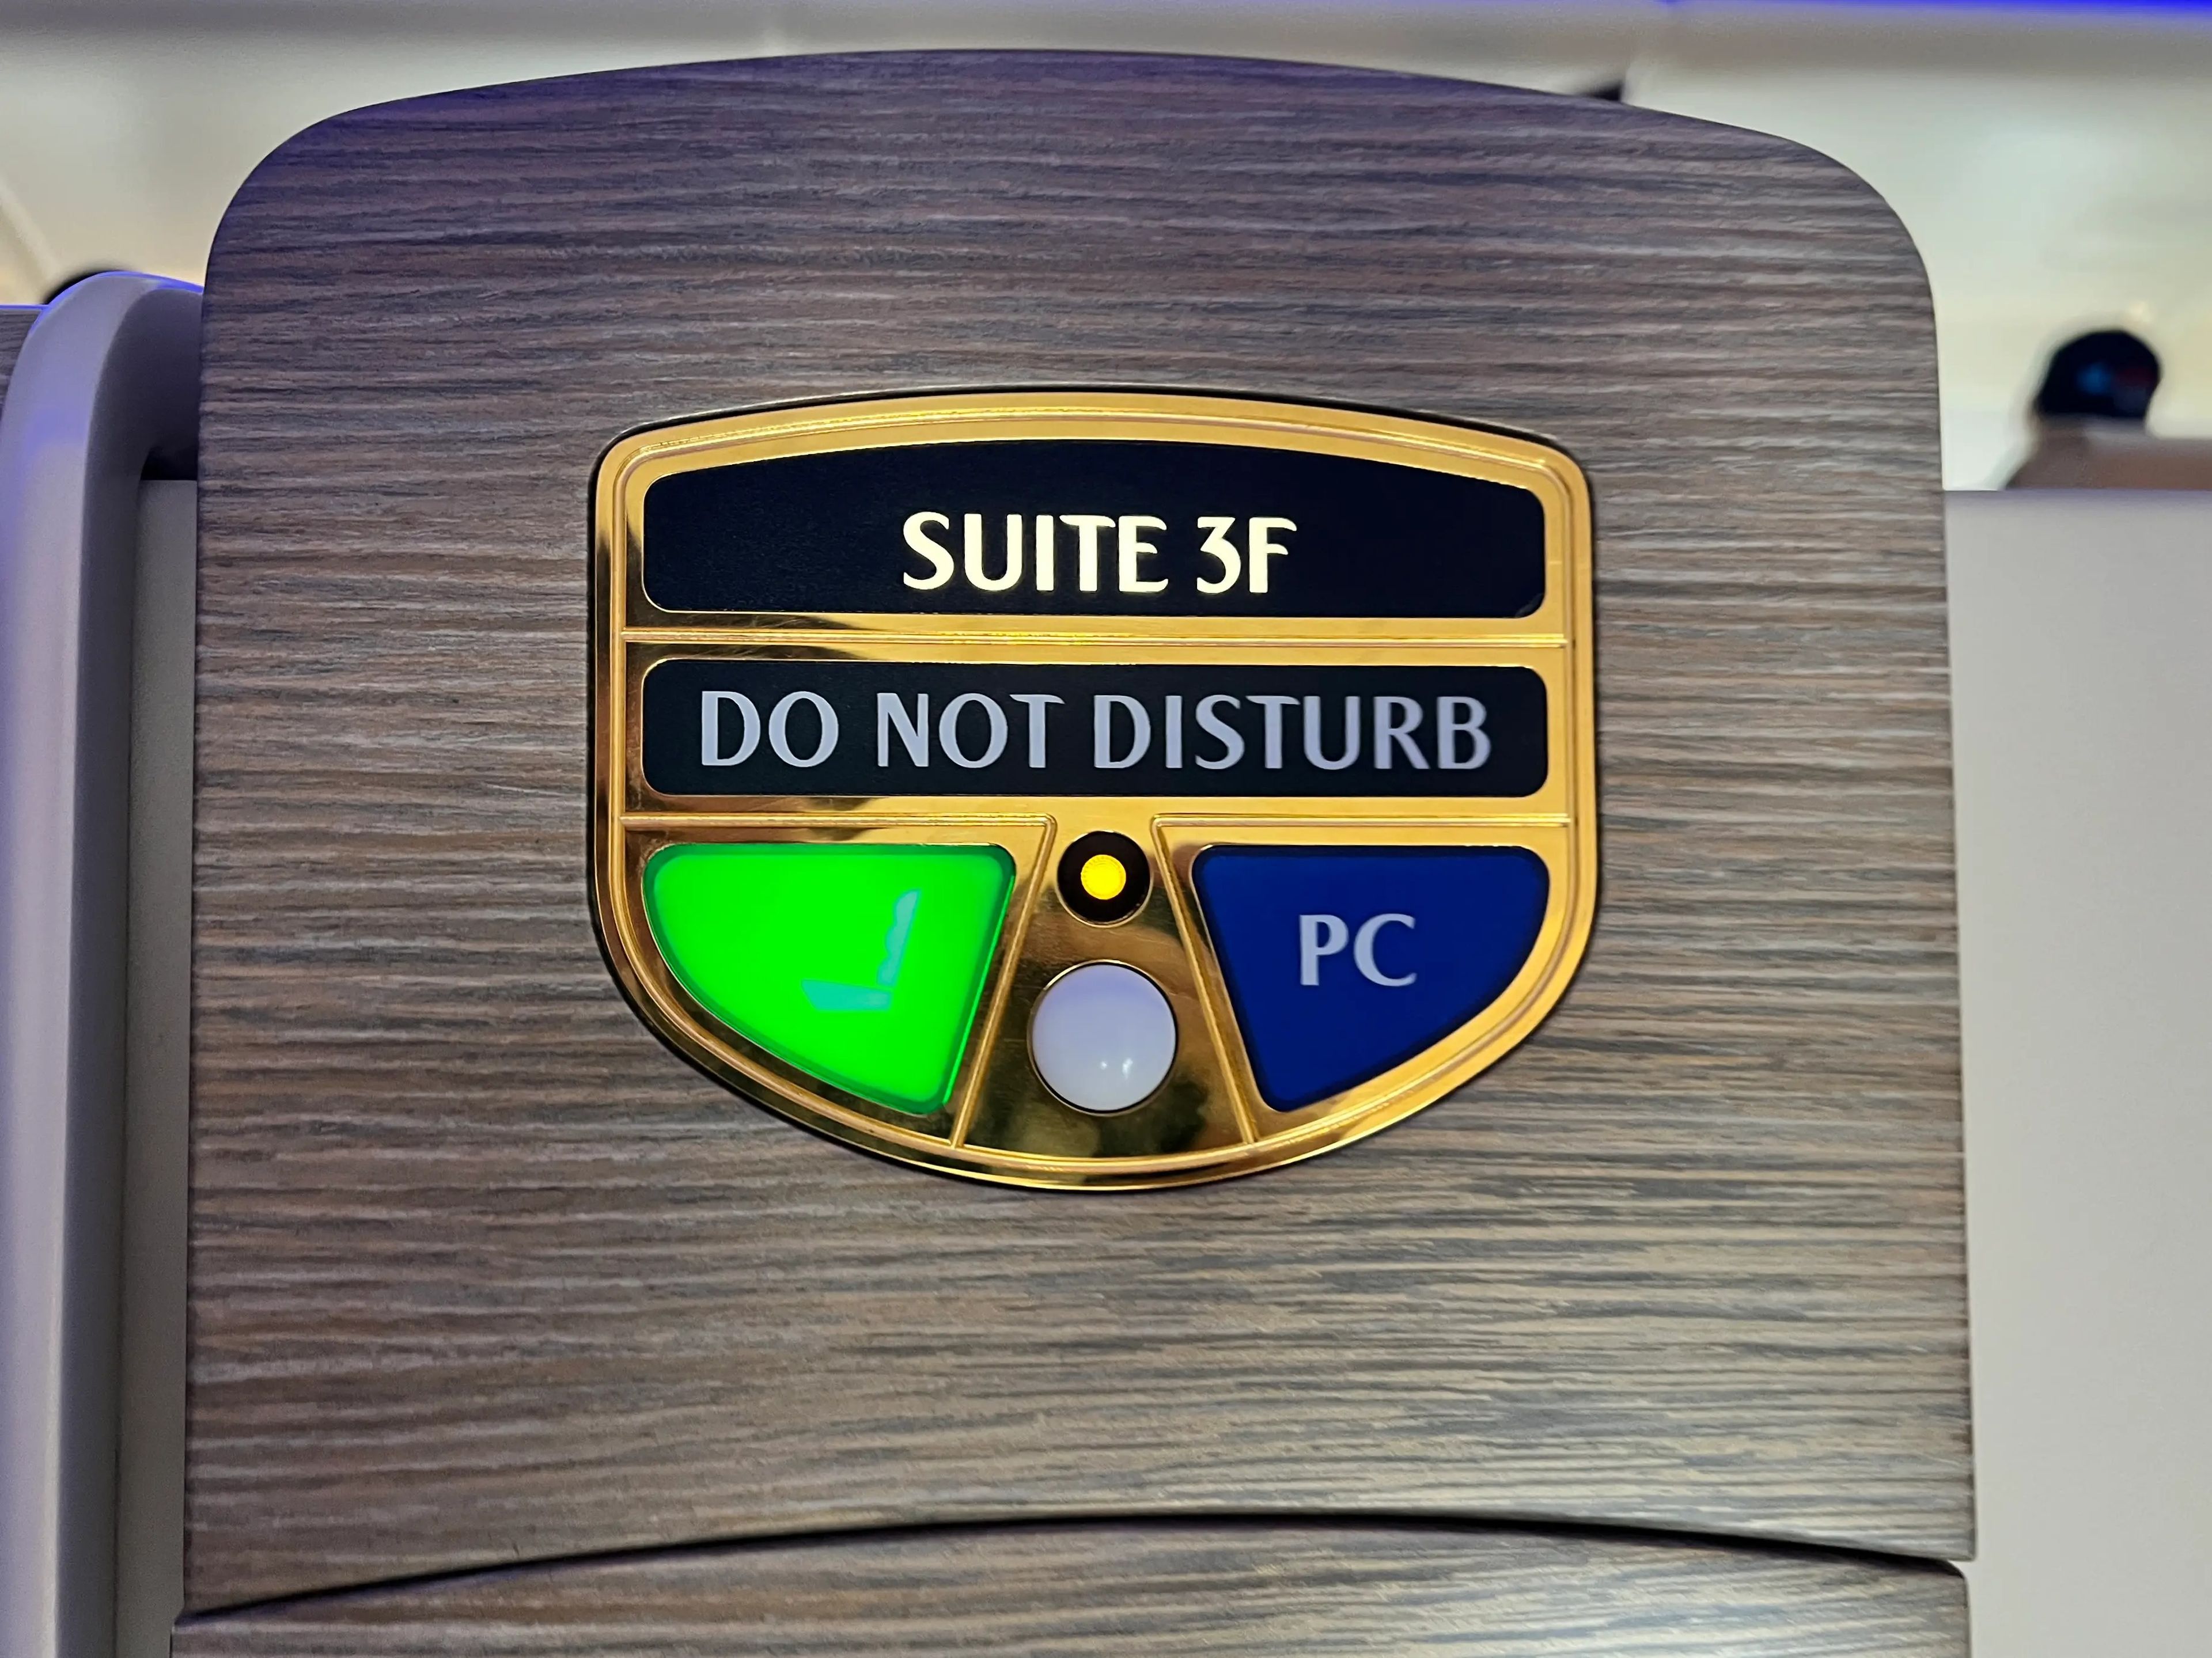 The do not disturb sign and seat number on Emirates A380 first class